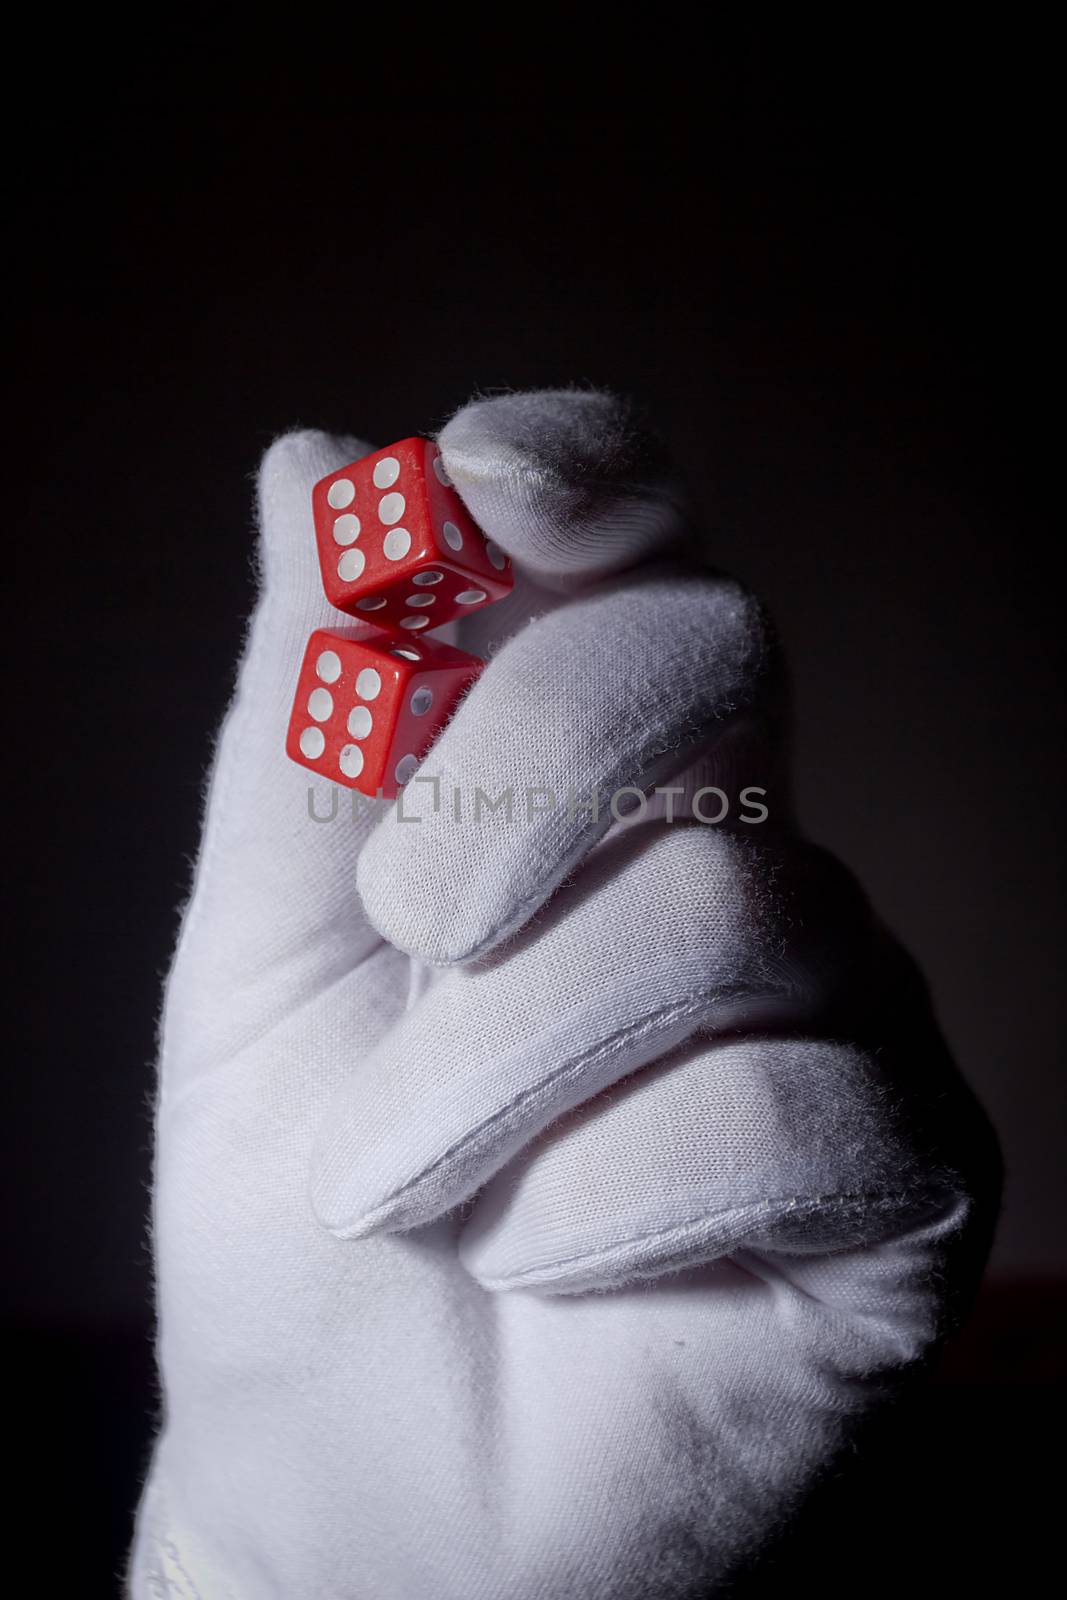 Hand in a white glove with red dice